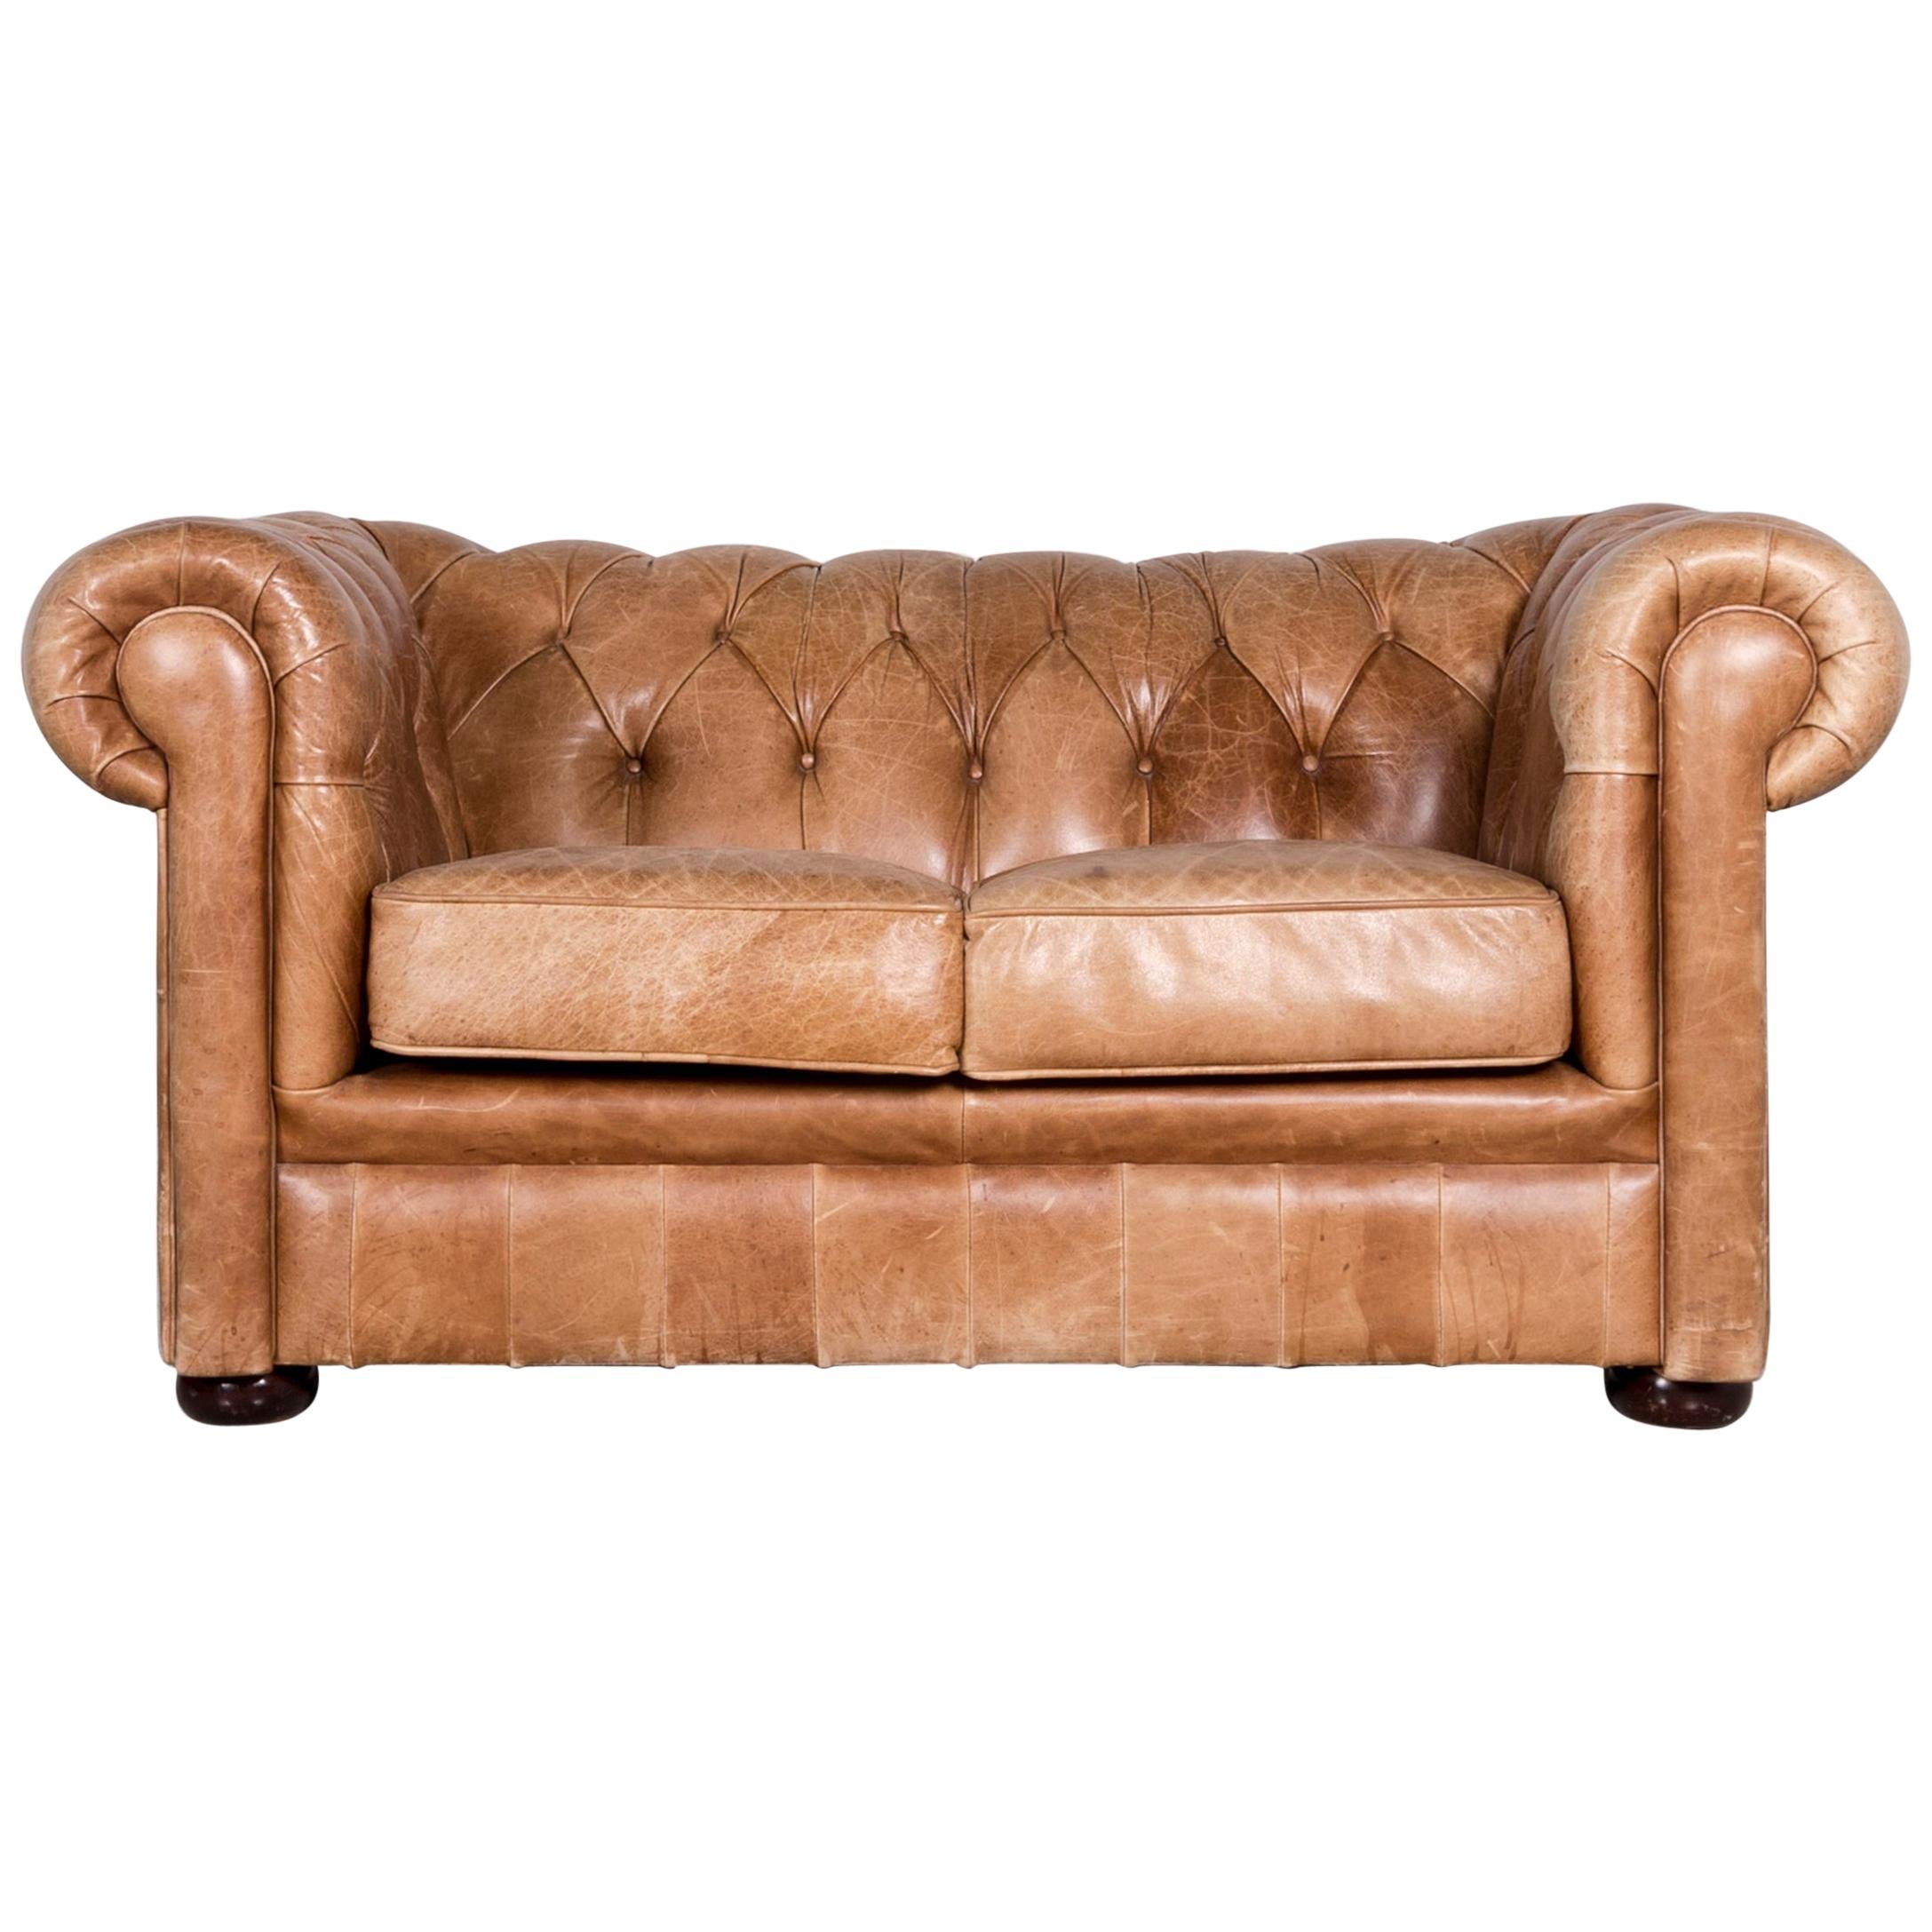 Chesterfield Leather Sofa Brown Red Vintage Two-Seat Couch For Sale